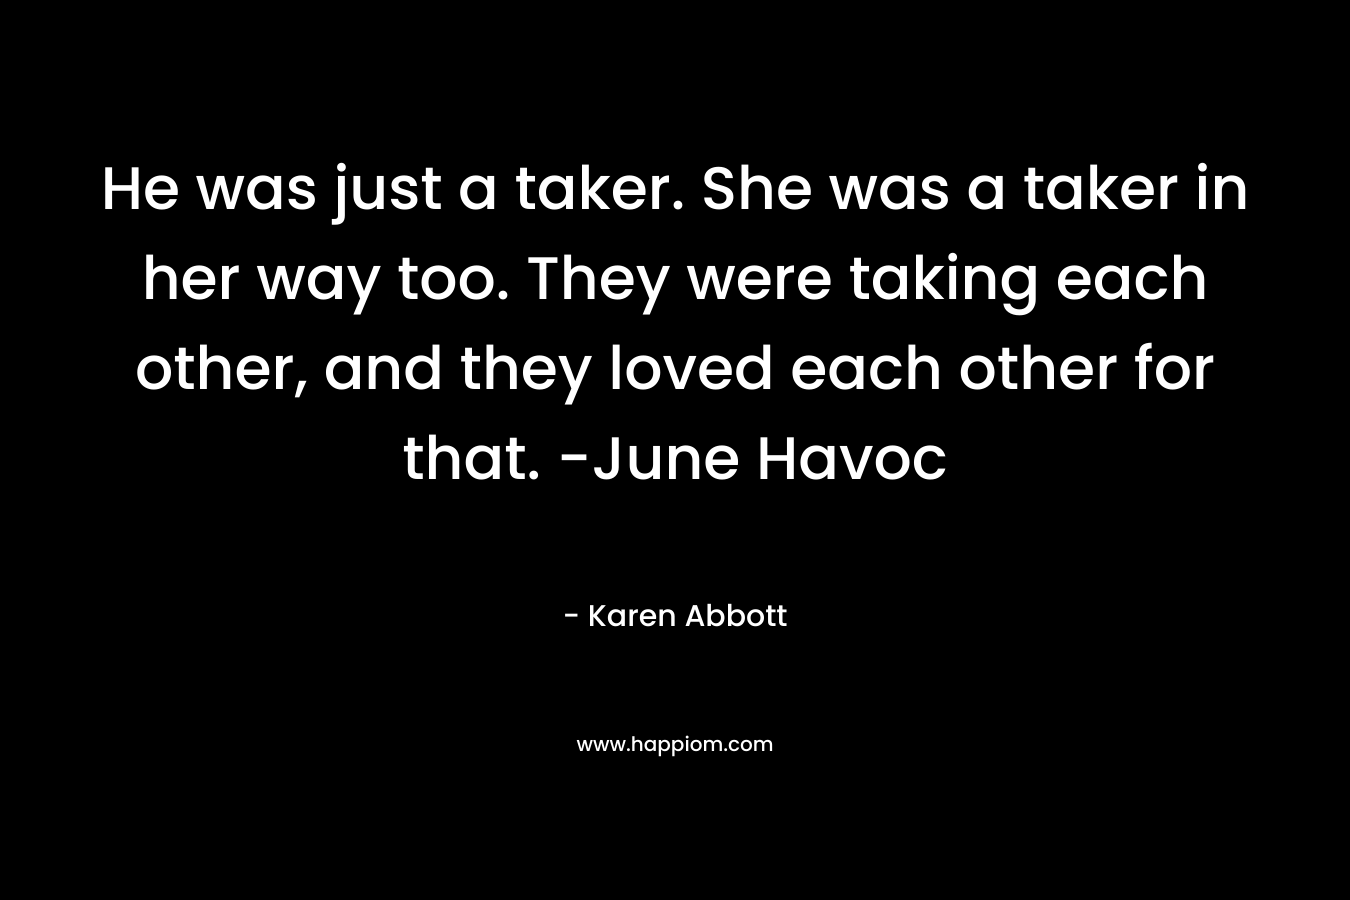 He was just a taker. She was a taker in her way too. They were taking each other, and they loved each other for that. -June Havoc – Karen Abbott